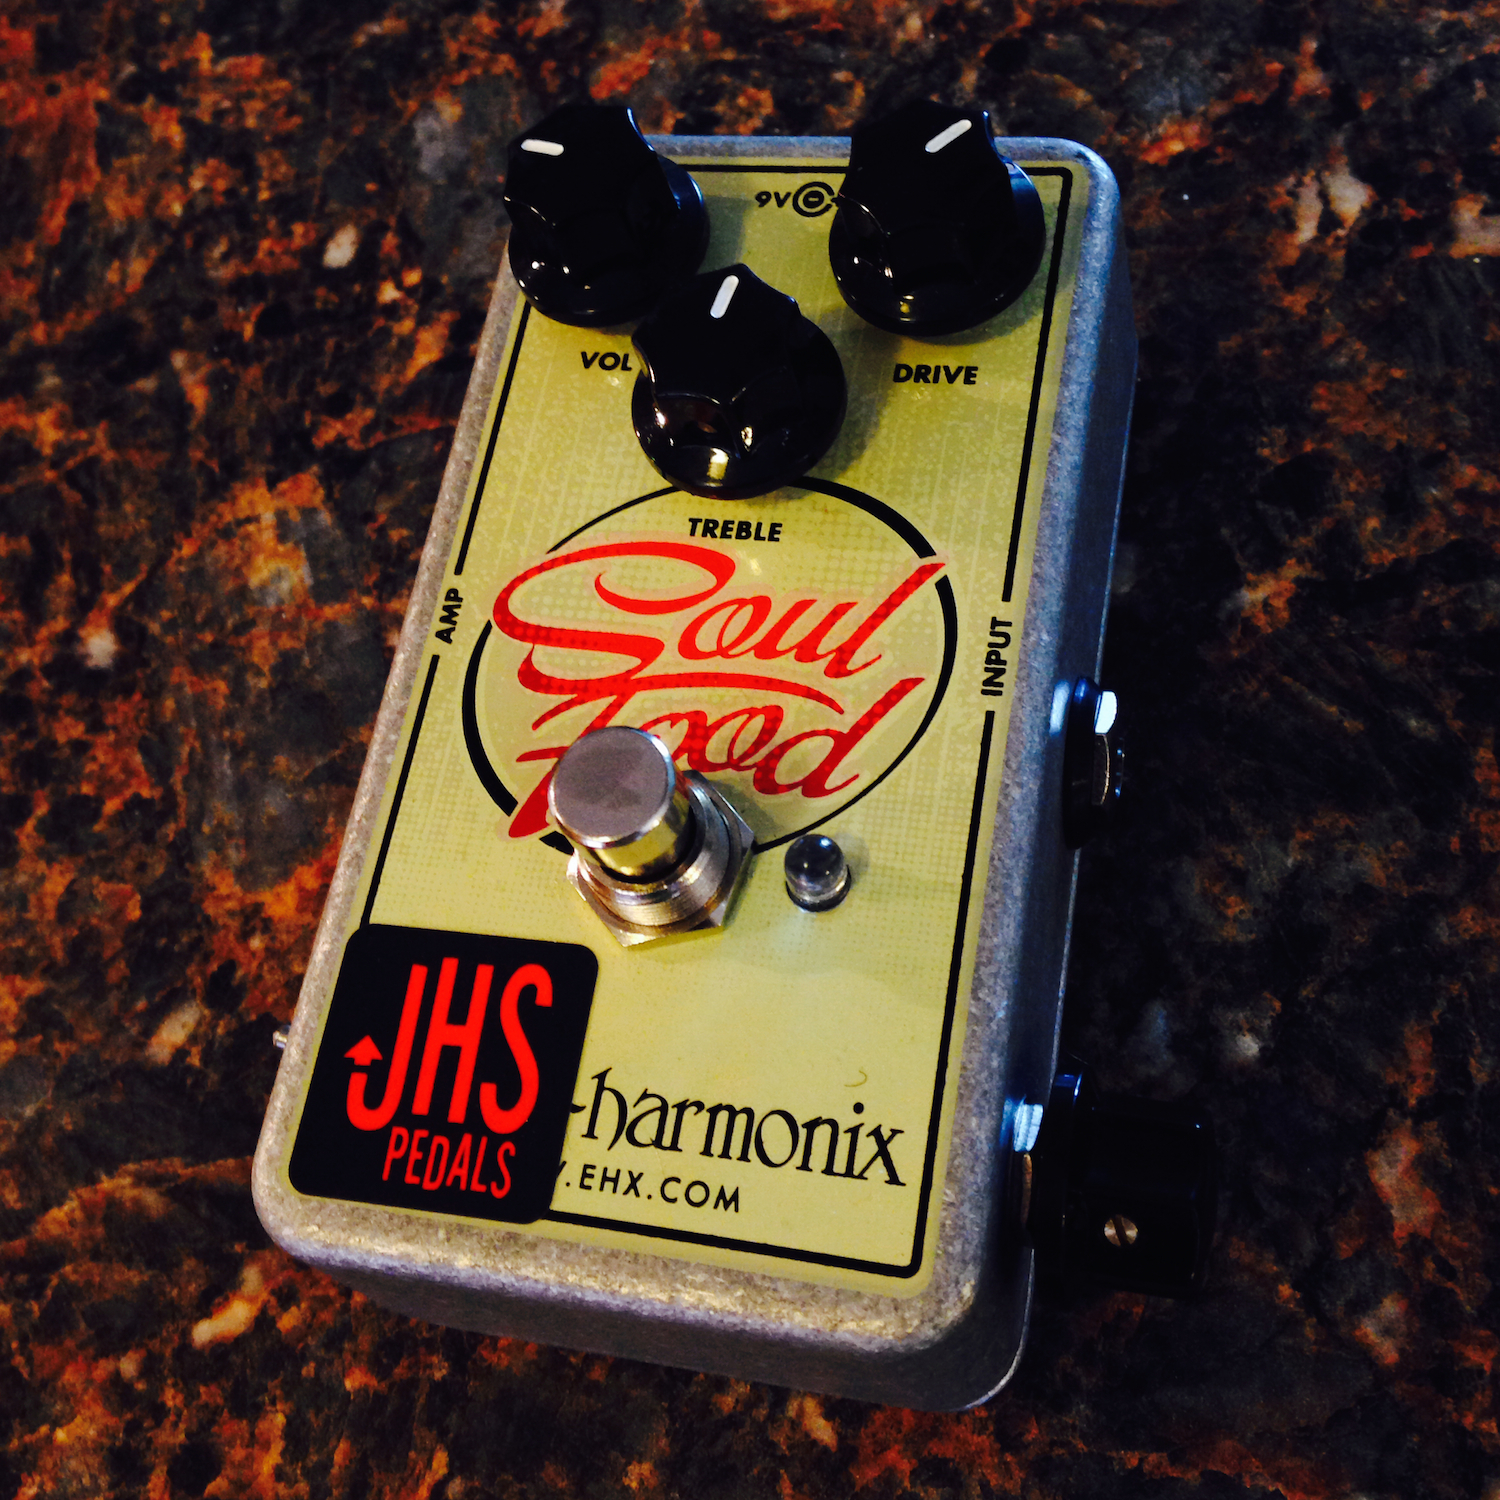 JHS Pedals Archives - Pedal of the Day